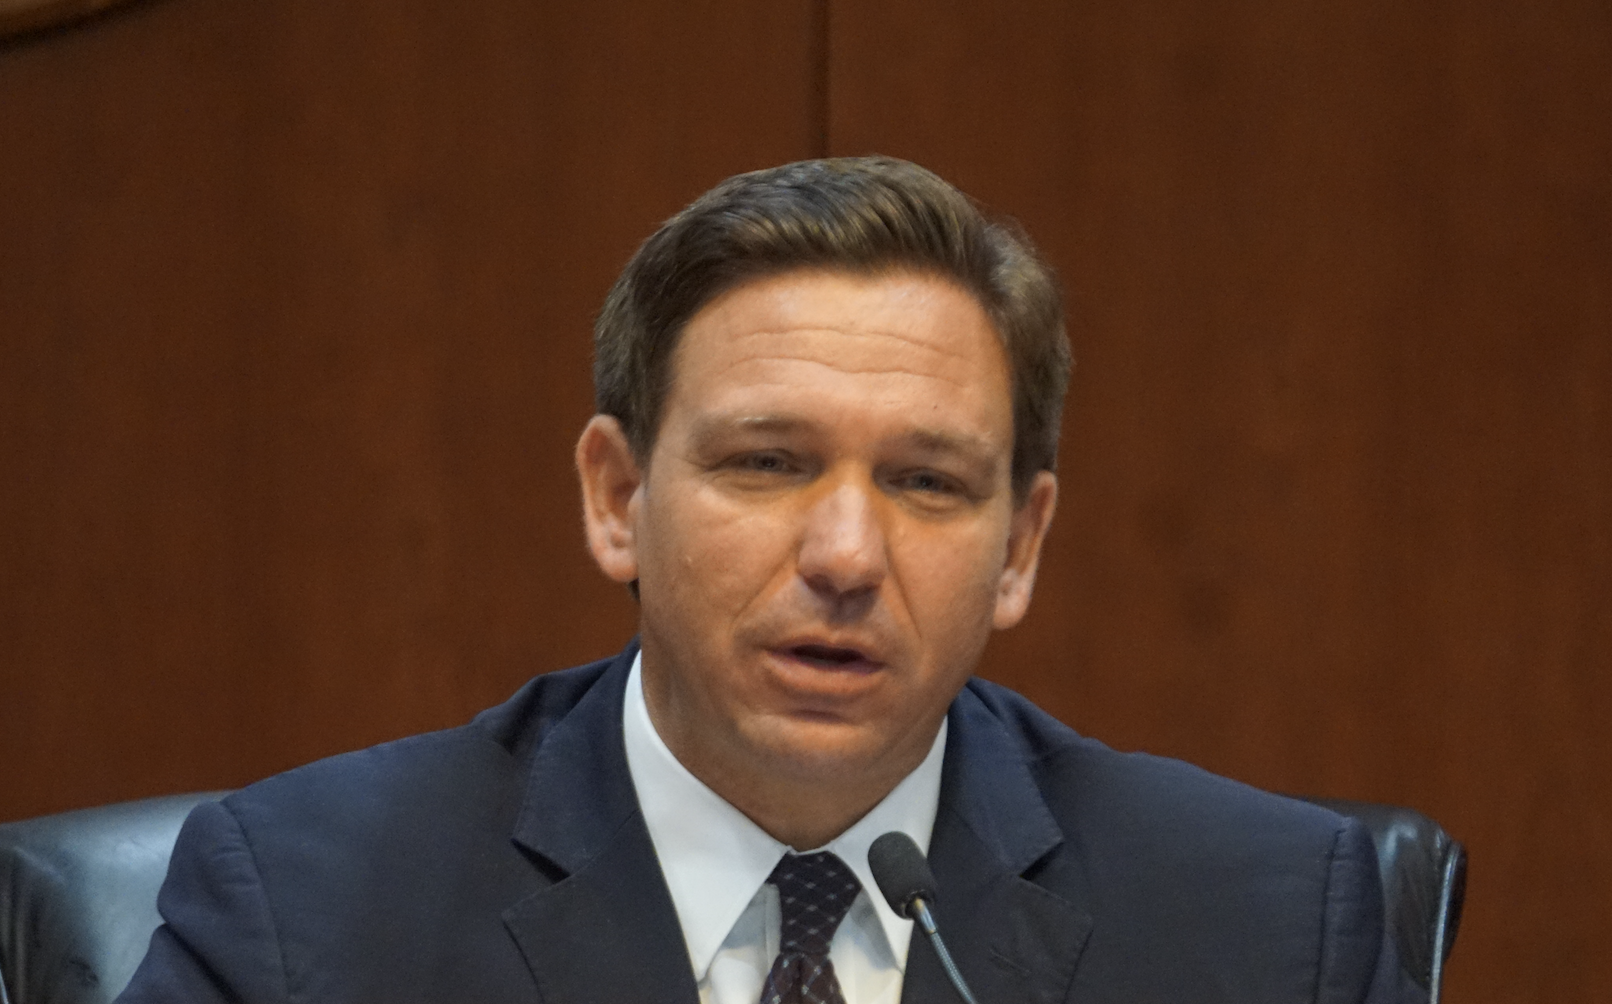 DeSantis Declares State of Emergency in SW Florida Due To 'Imminent' Wastewater Pond Breach